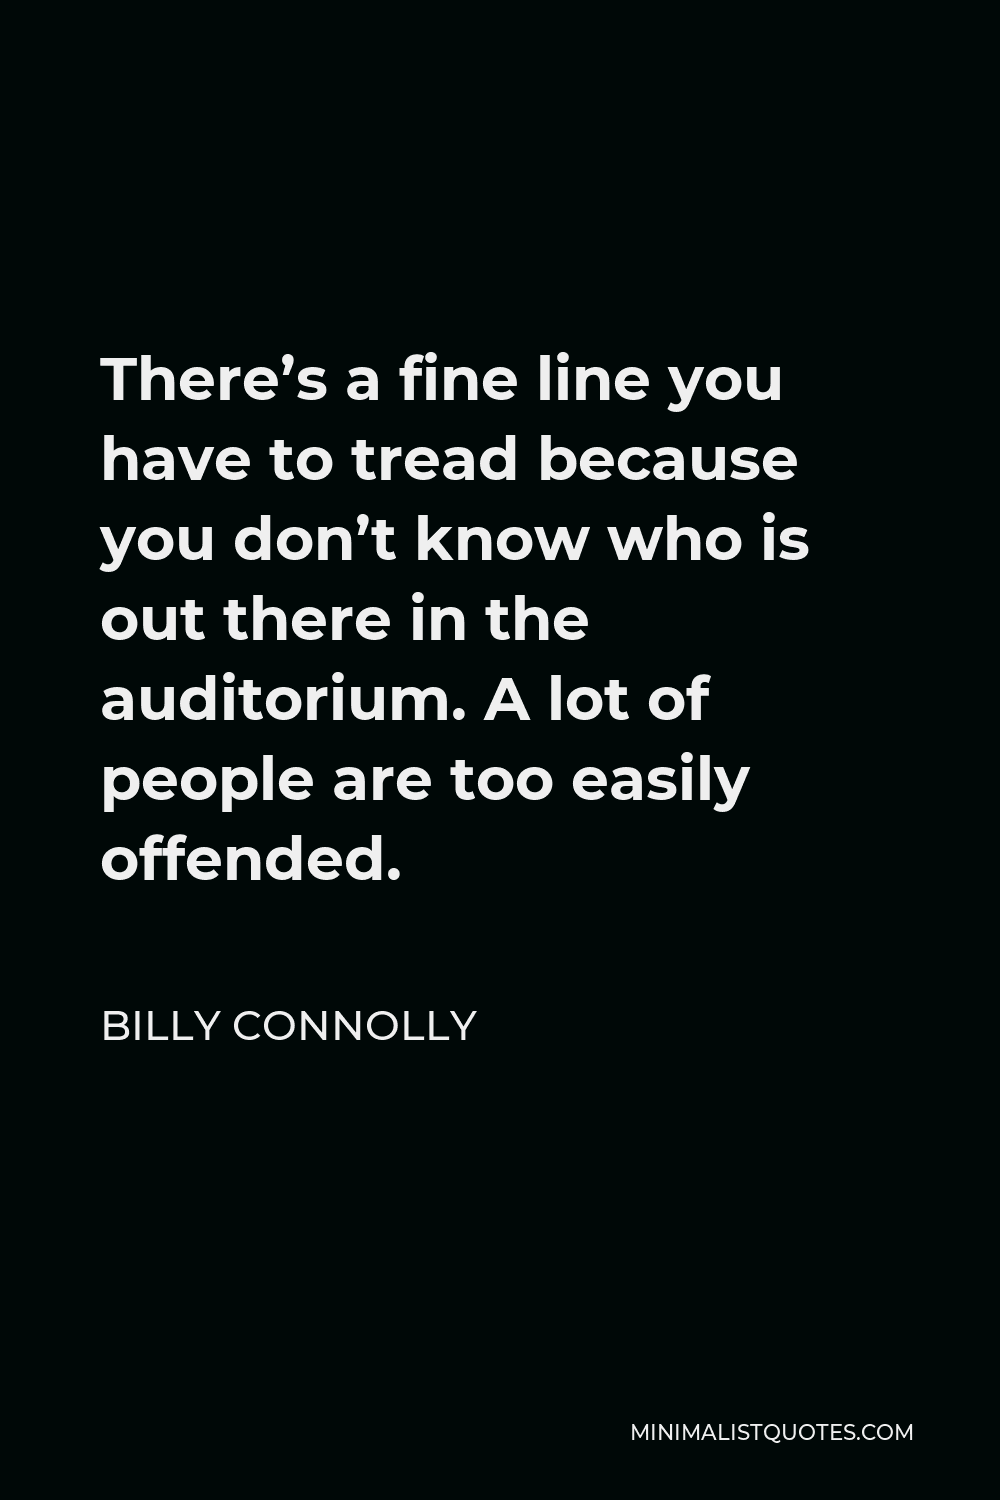 Billy Connolly Quote - There’s a fine line you have to tread because you don’t know who is out there in the auditorium. A lot of people are too easily offended.